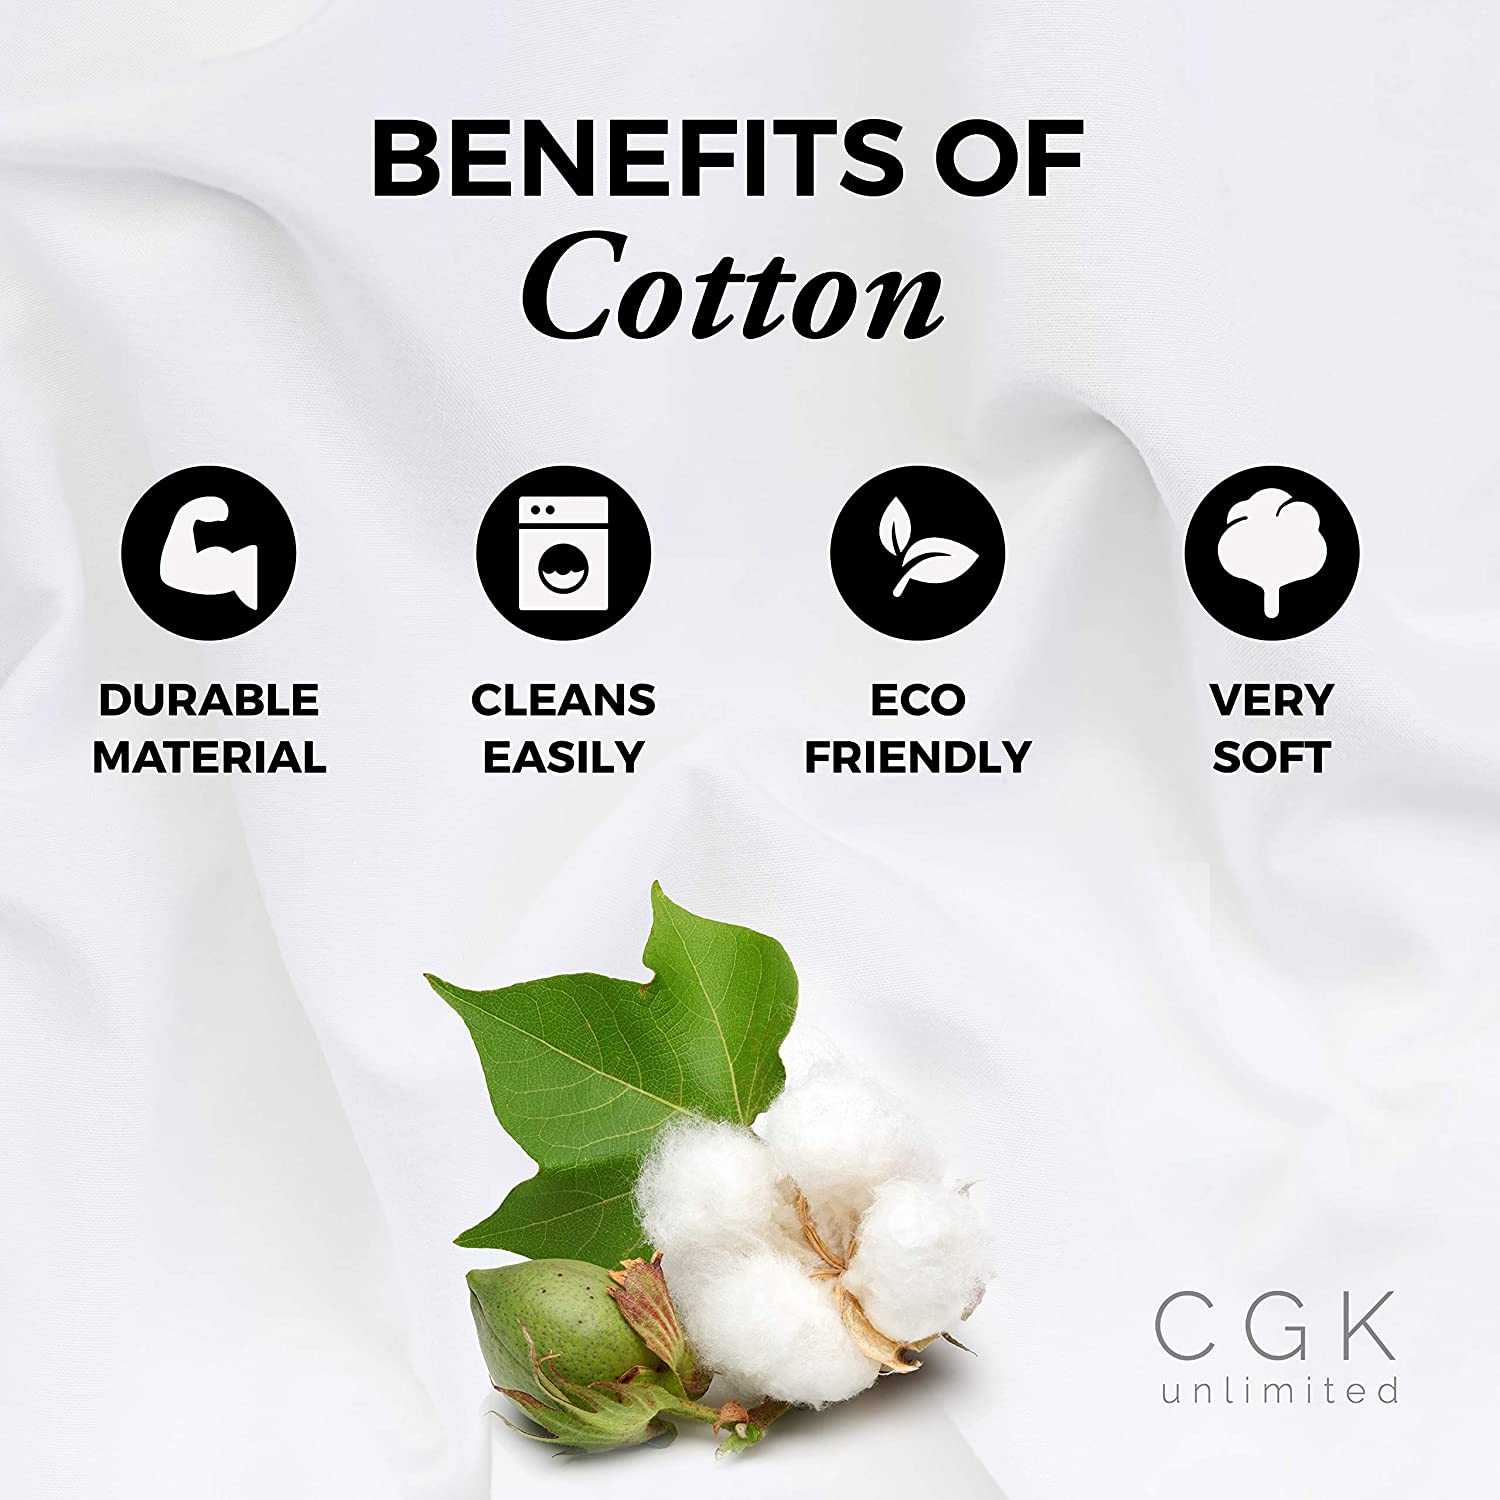 Benefits of Cotton: Durable, cleans easy, eco friendly and very soft